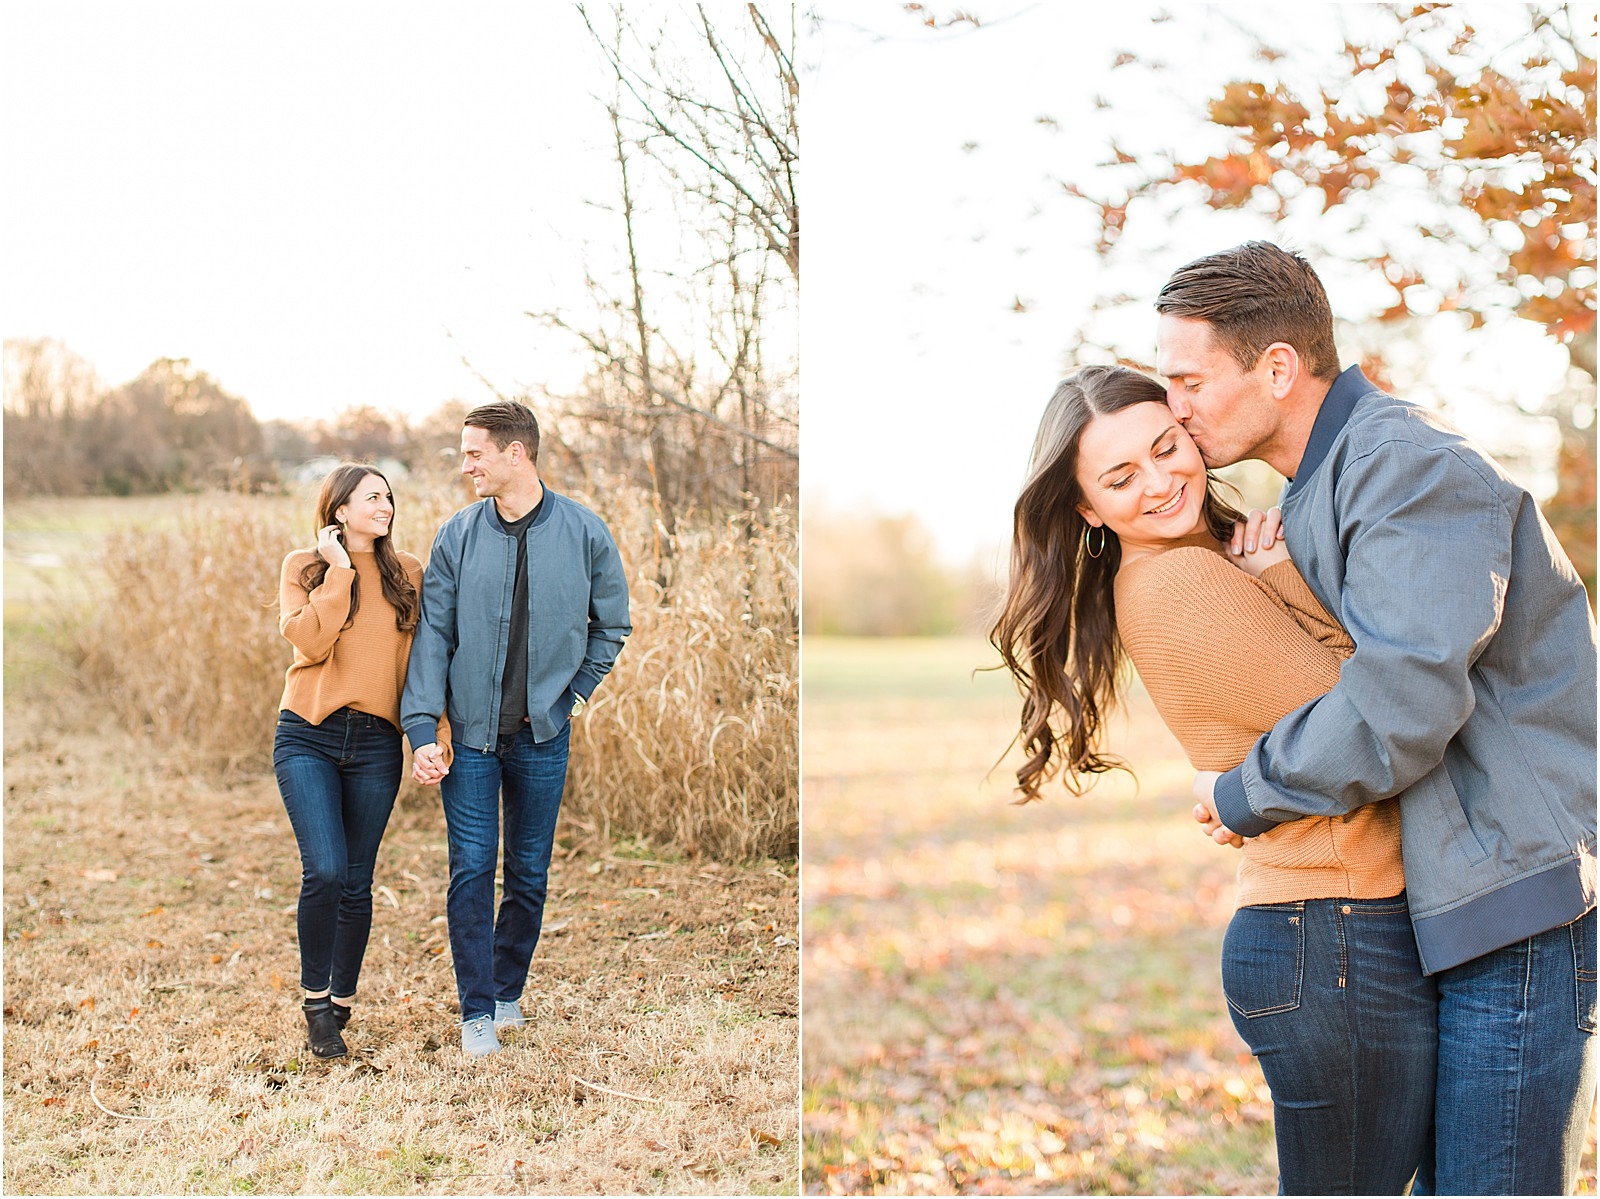 Kaley and Devon's fall Evansville Indiana engagement session. | #fallengagementsession #evansvilleindiana #evansvilleindianawedding | 0033.jpg